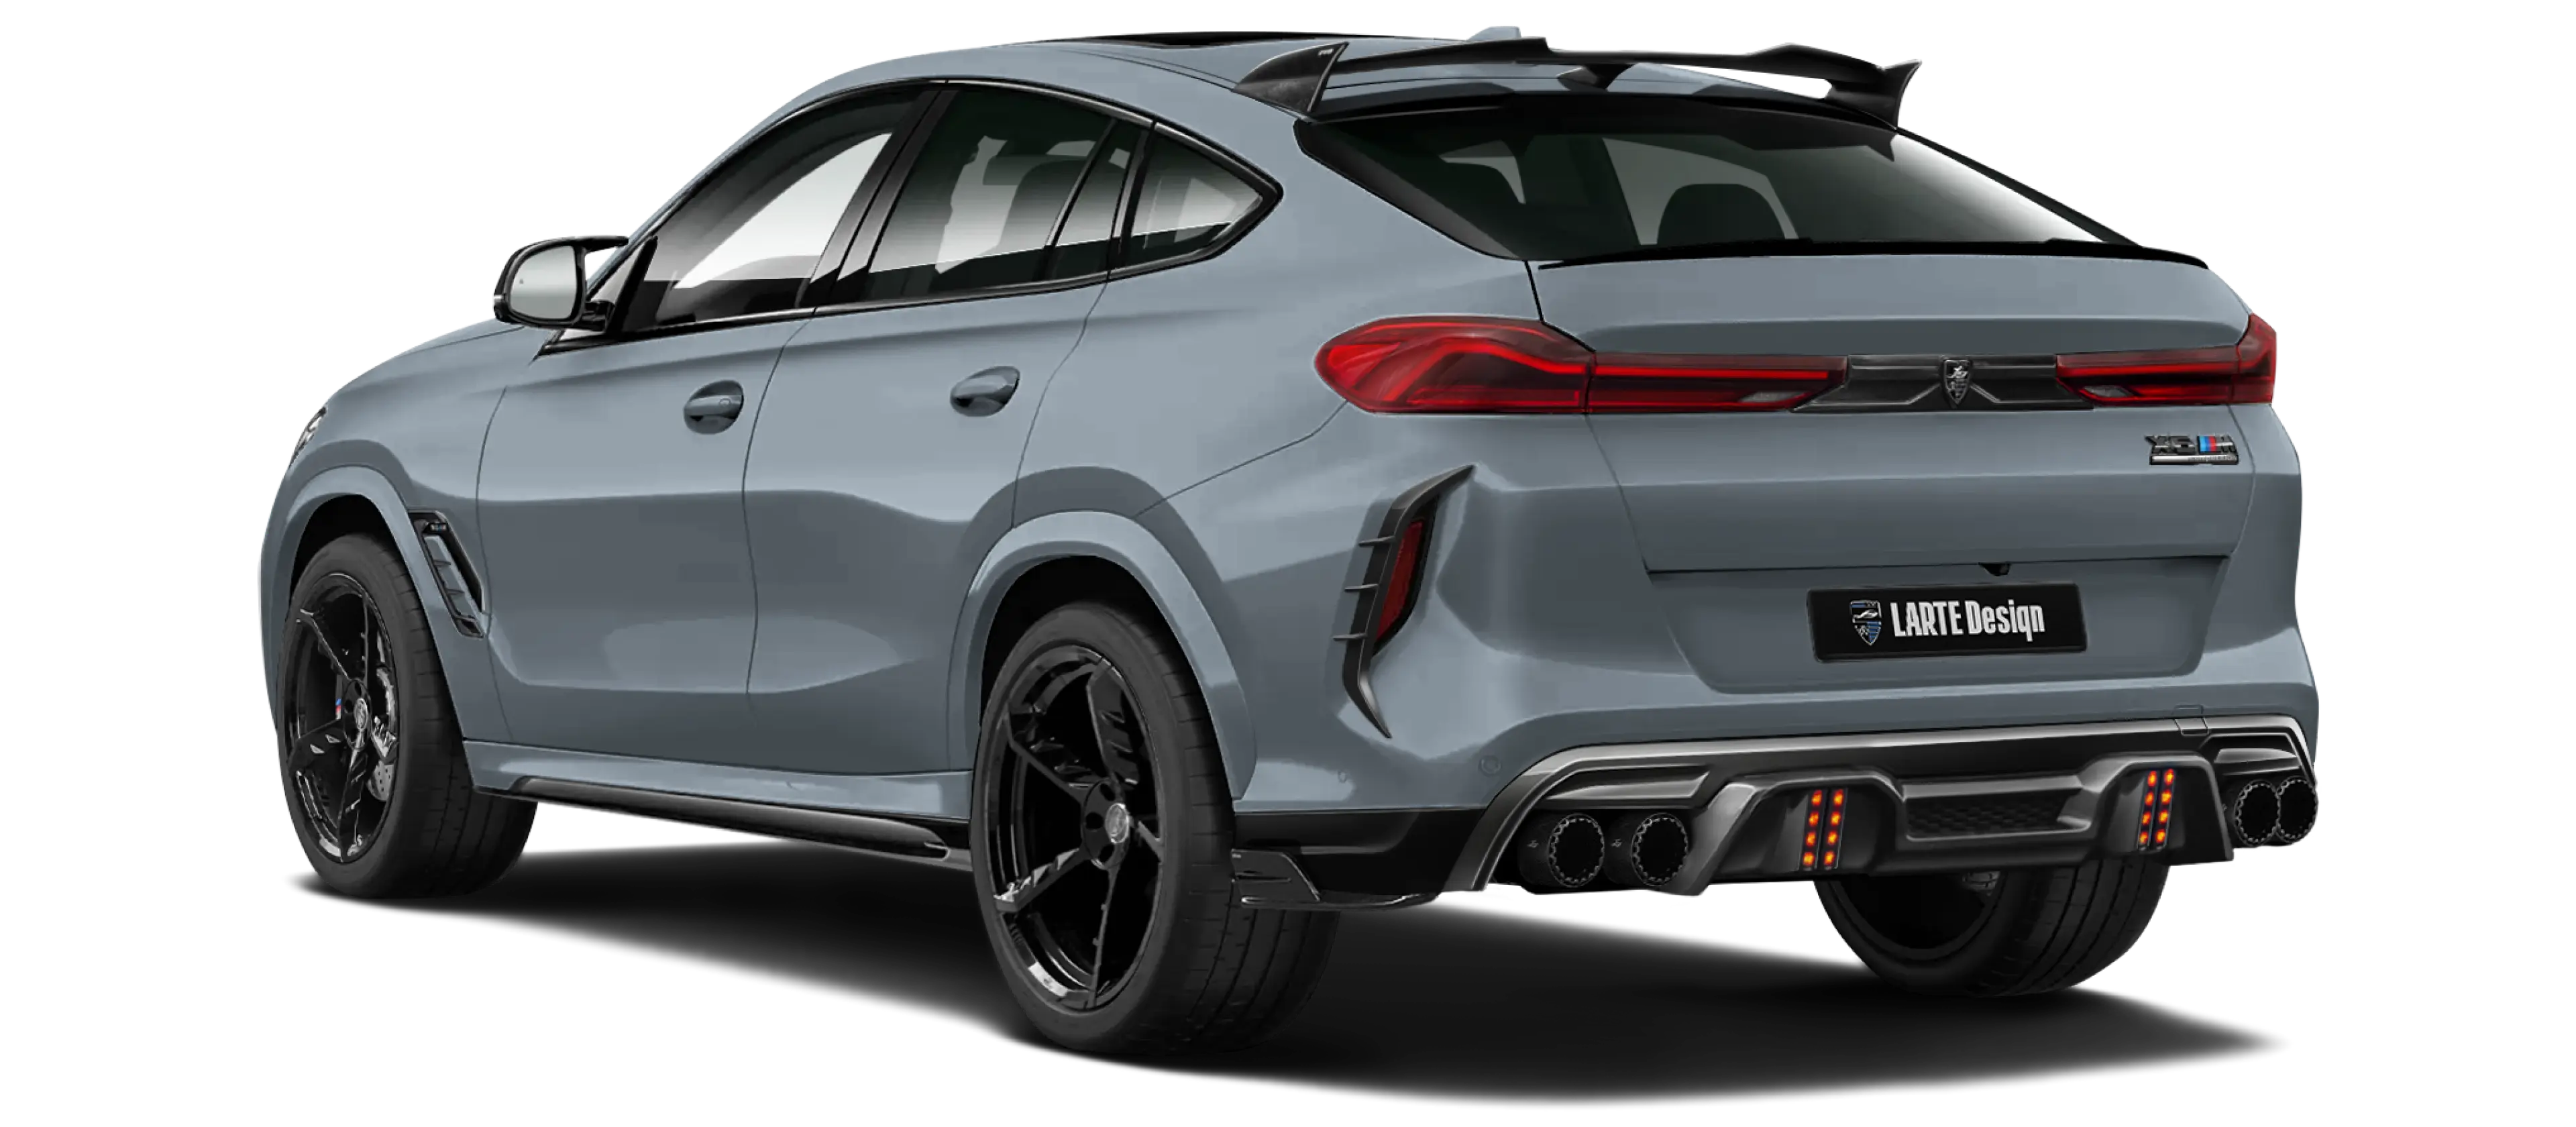 BMW X6M F96 LCI 2023 with painted body kit: rear view shown in Frosty clean gray